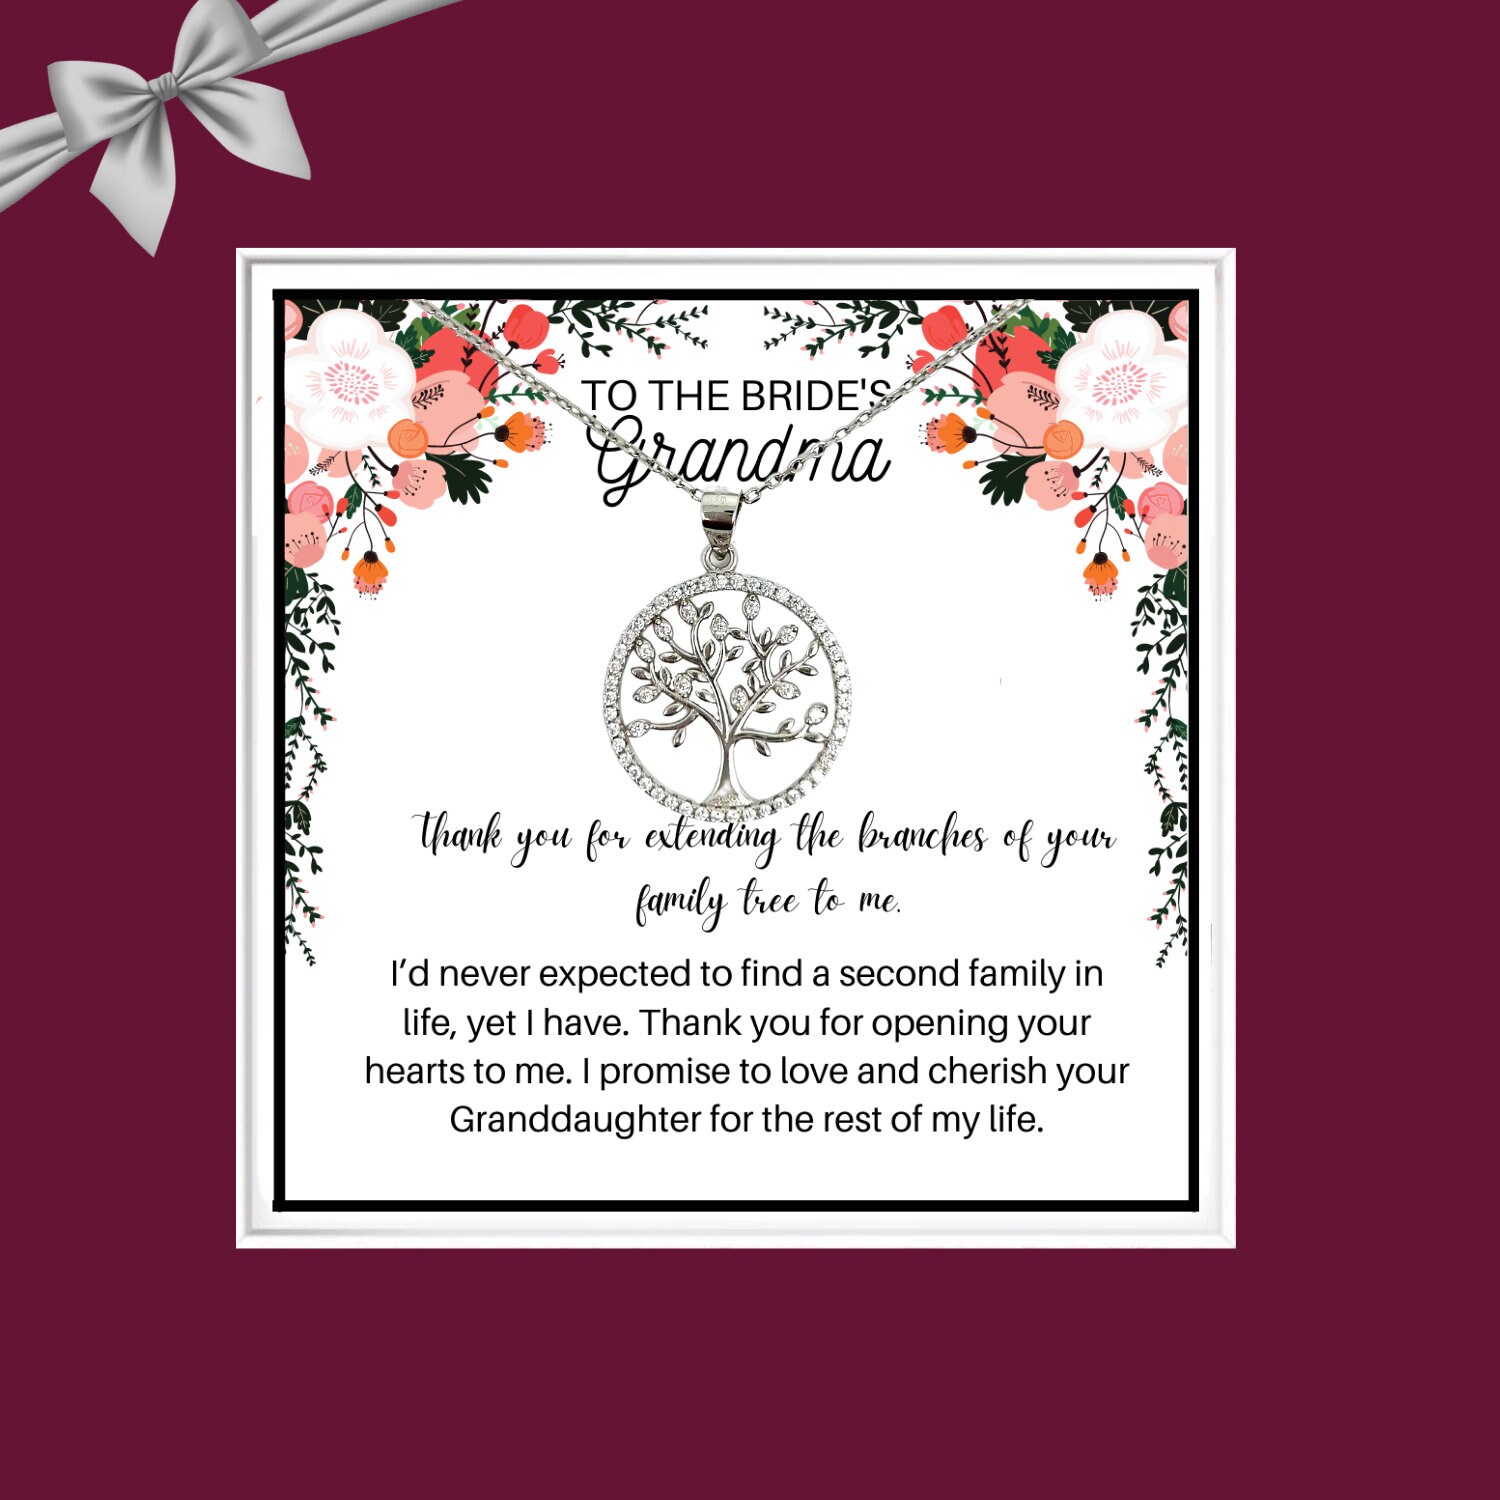 personalized card necklace Grandma of bride gifts on wedding Thank you message wedding gift Ideas in laws message from groom bride